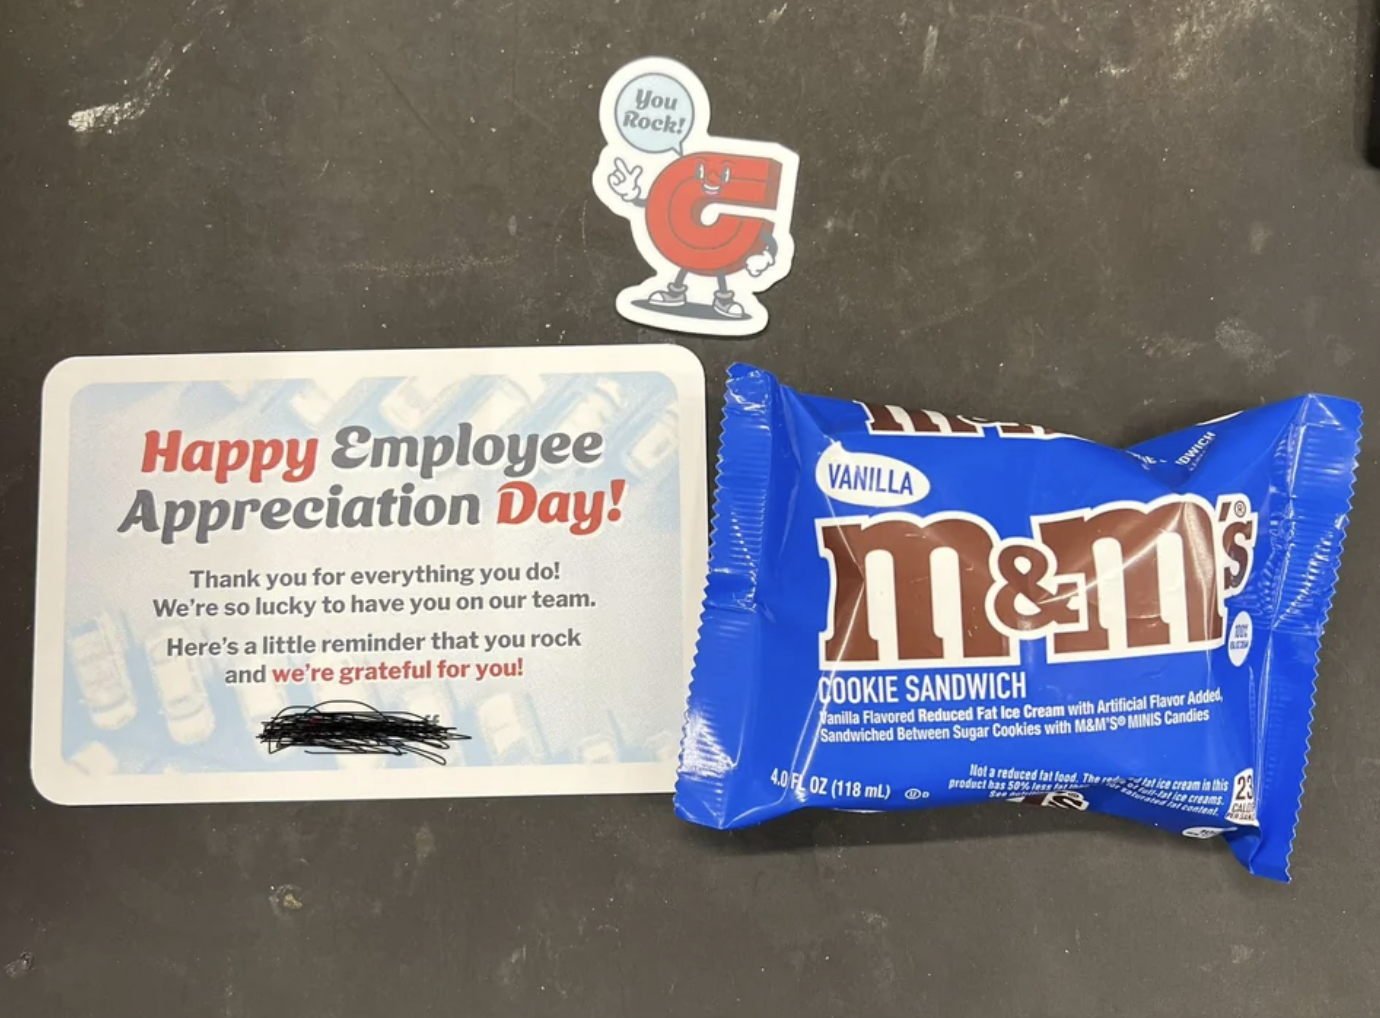 shirataki noodles - You Rock! Happy Employee Appreciation Day! Thank you for everything you do! We're so lucky to have you on our team. Here's a little reminder that you rock and we're grateful for you! Vanilla M&1 Cookie Sandwich Fanita Flavored Reduced 